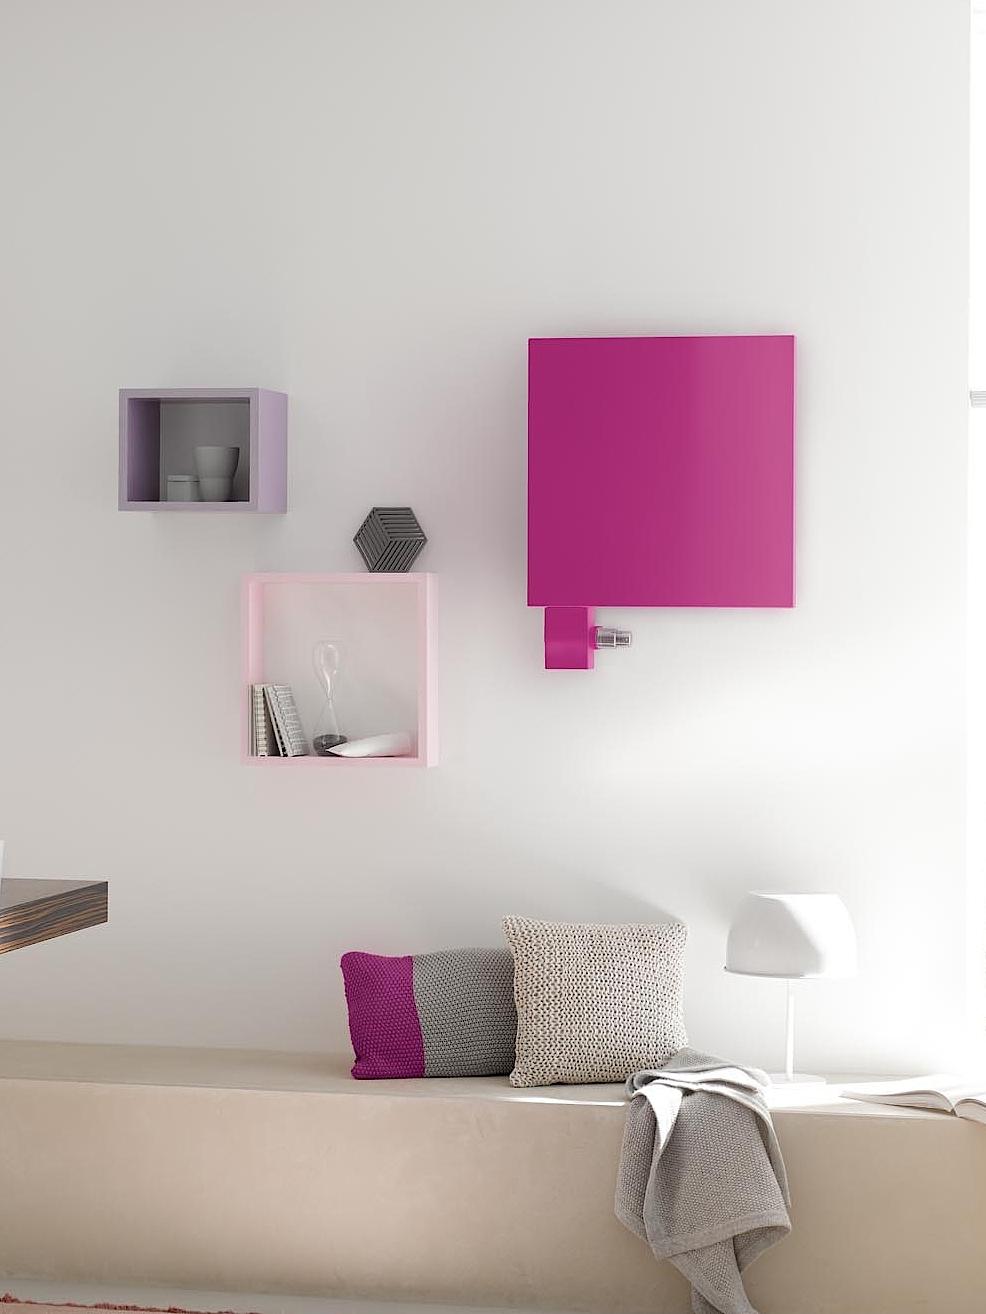 The Kermi Signo design and bathroom radiator is a real eye-catcher in any room.